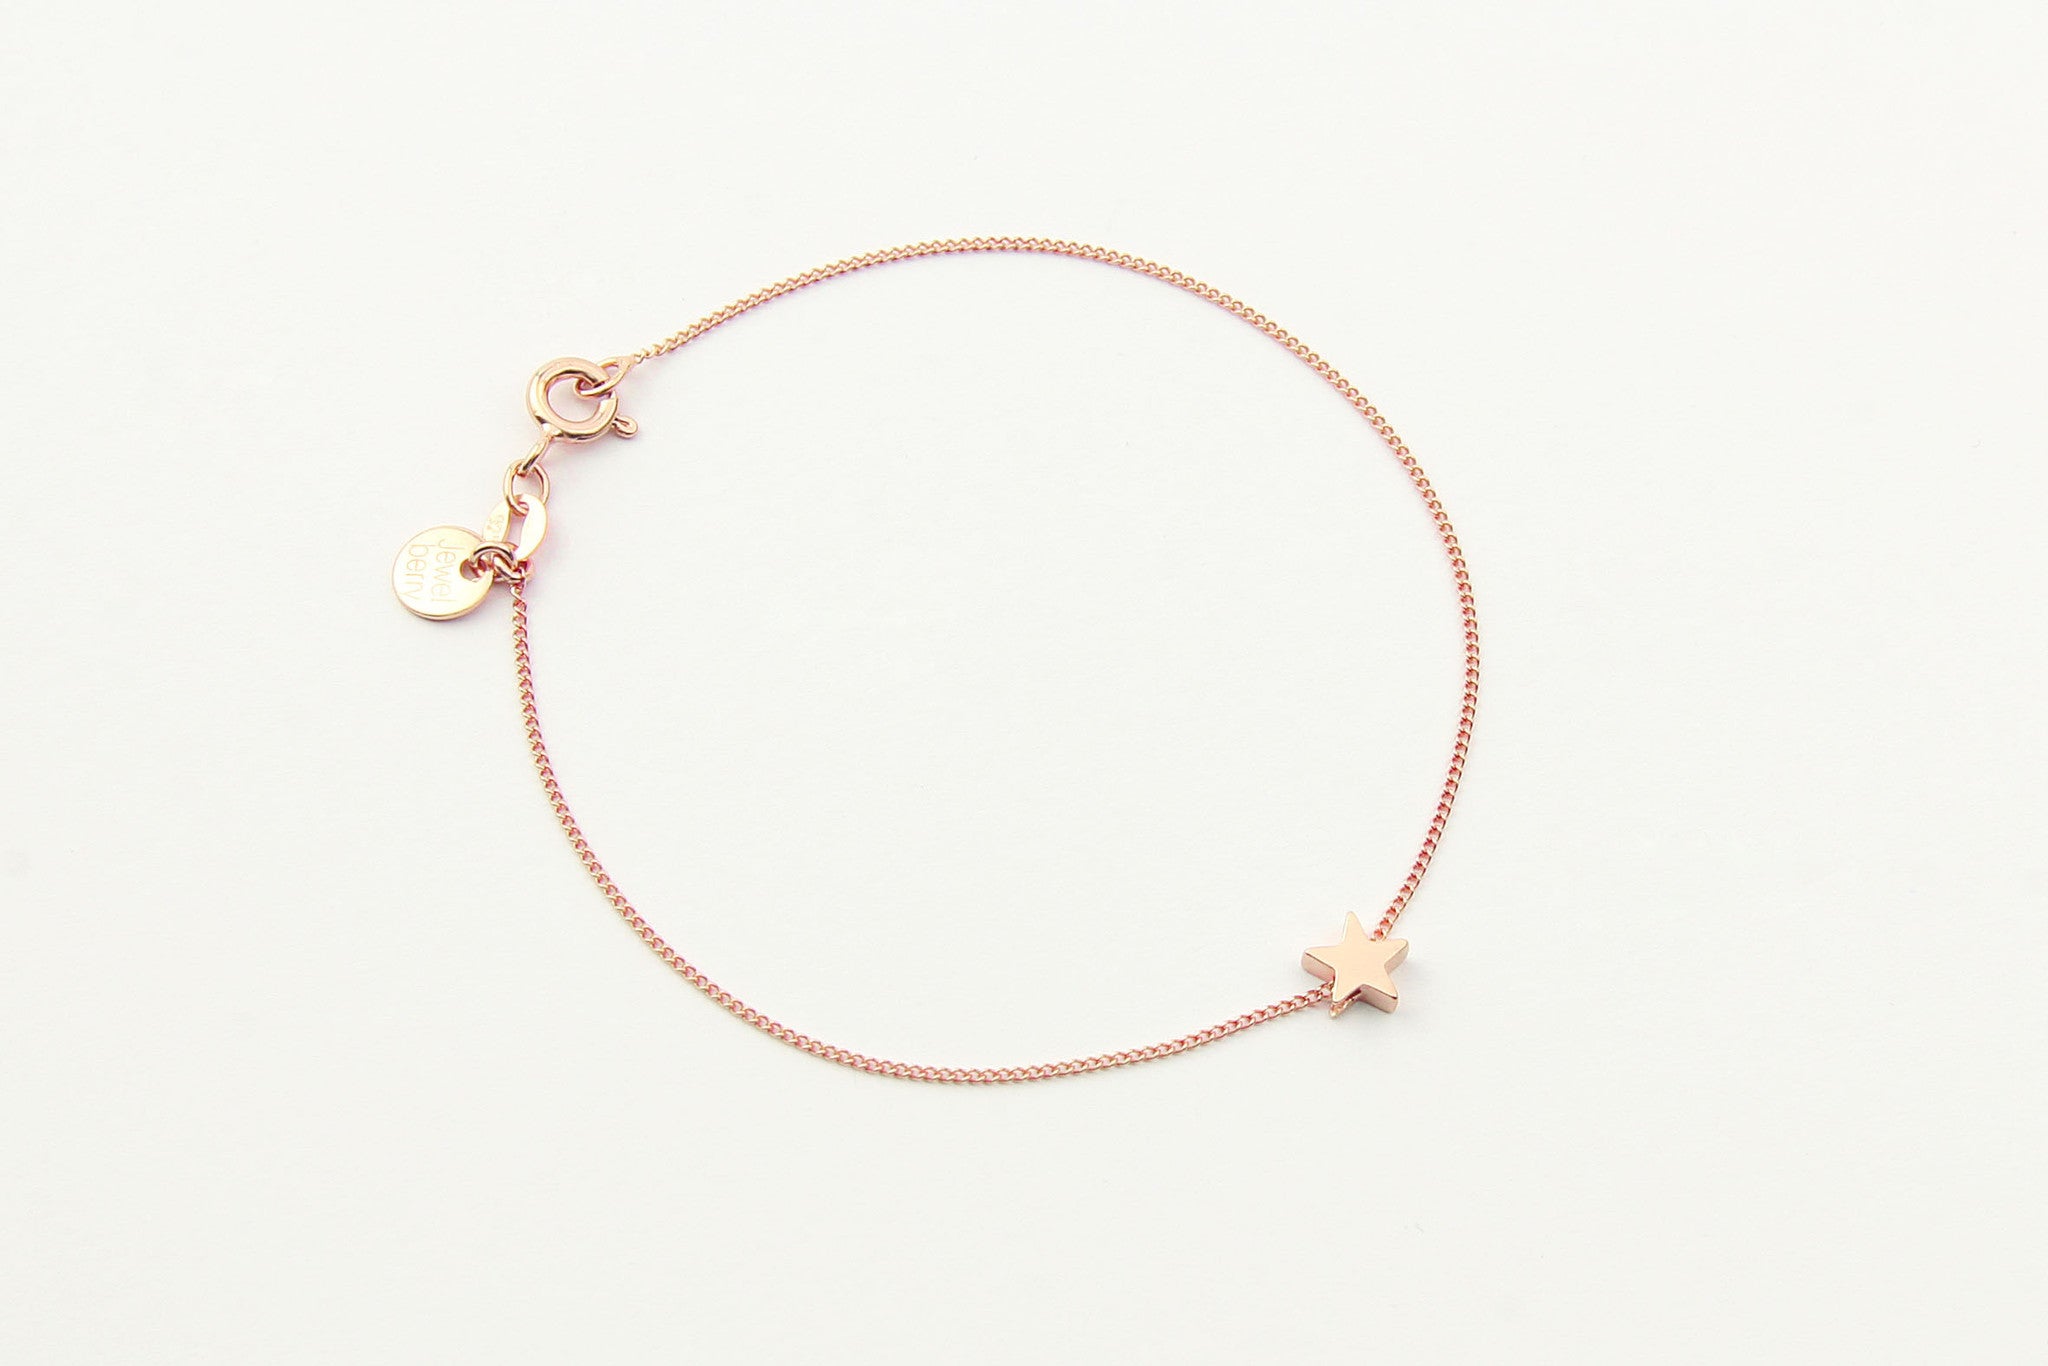 jewelberry armband bracelet little star rose gold plated sterling silver fine jewelry handmade with love fairtrade curb chain